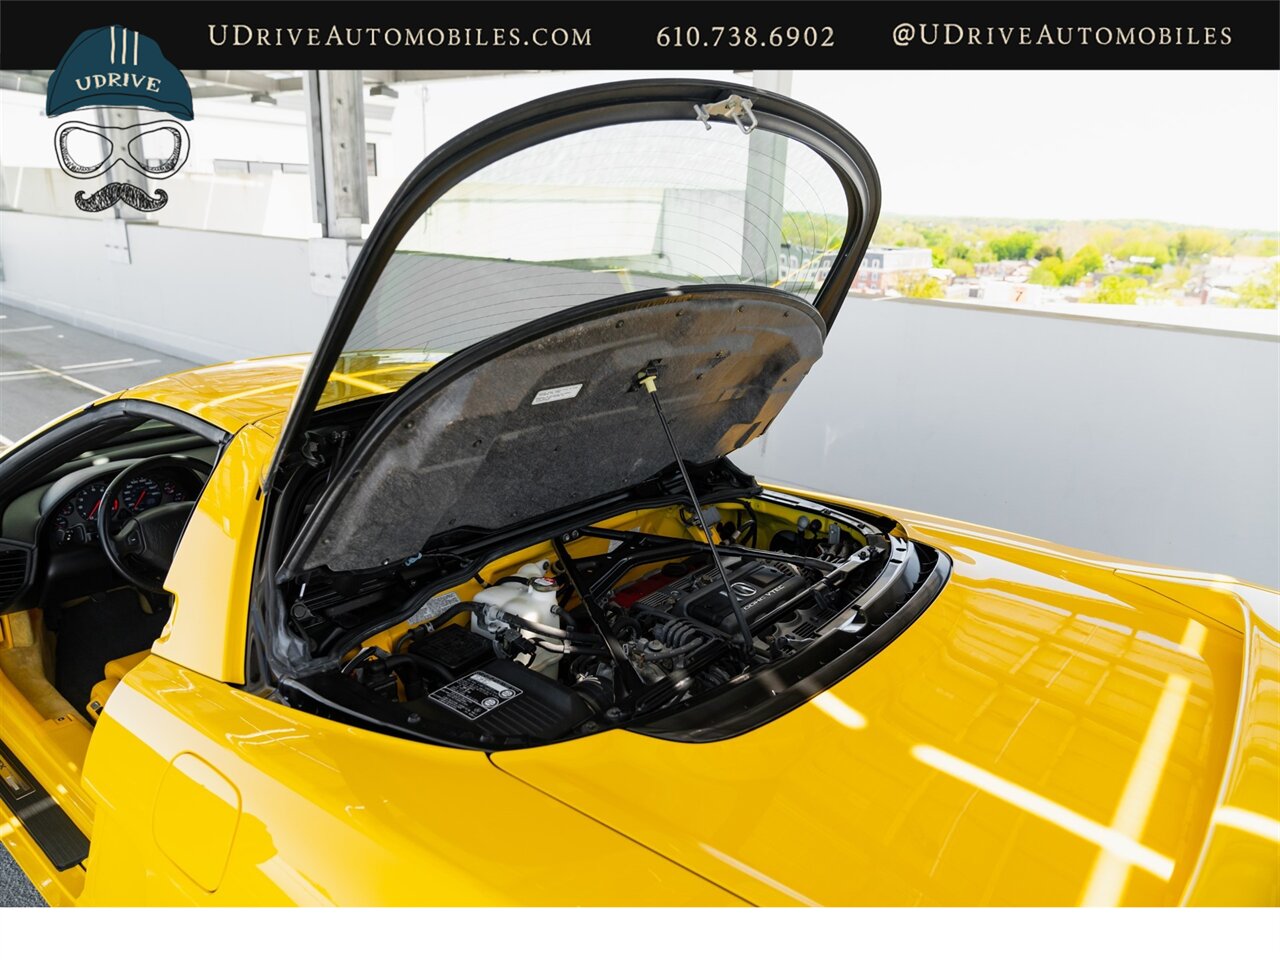 2003 Acura NSX NSX-T  Spa Yellow over Yellow Lthr 1 of 13 Produced - Photo 45 - West Chester, PA 19382